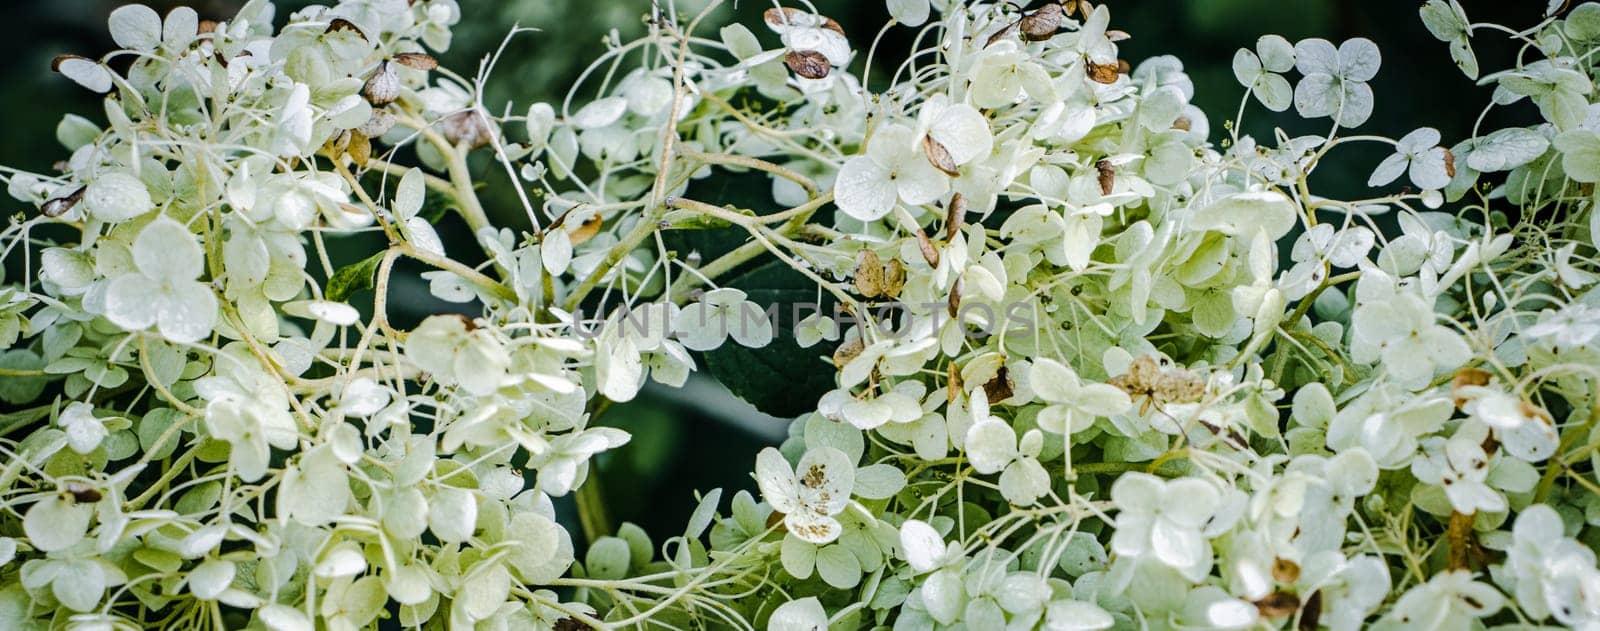 Close up beautiful white hortensia on the bush photo. The flowering of a hydrangea bush. by _Nataly_Nati_